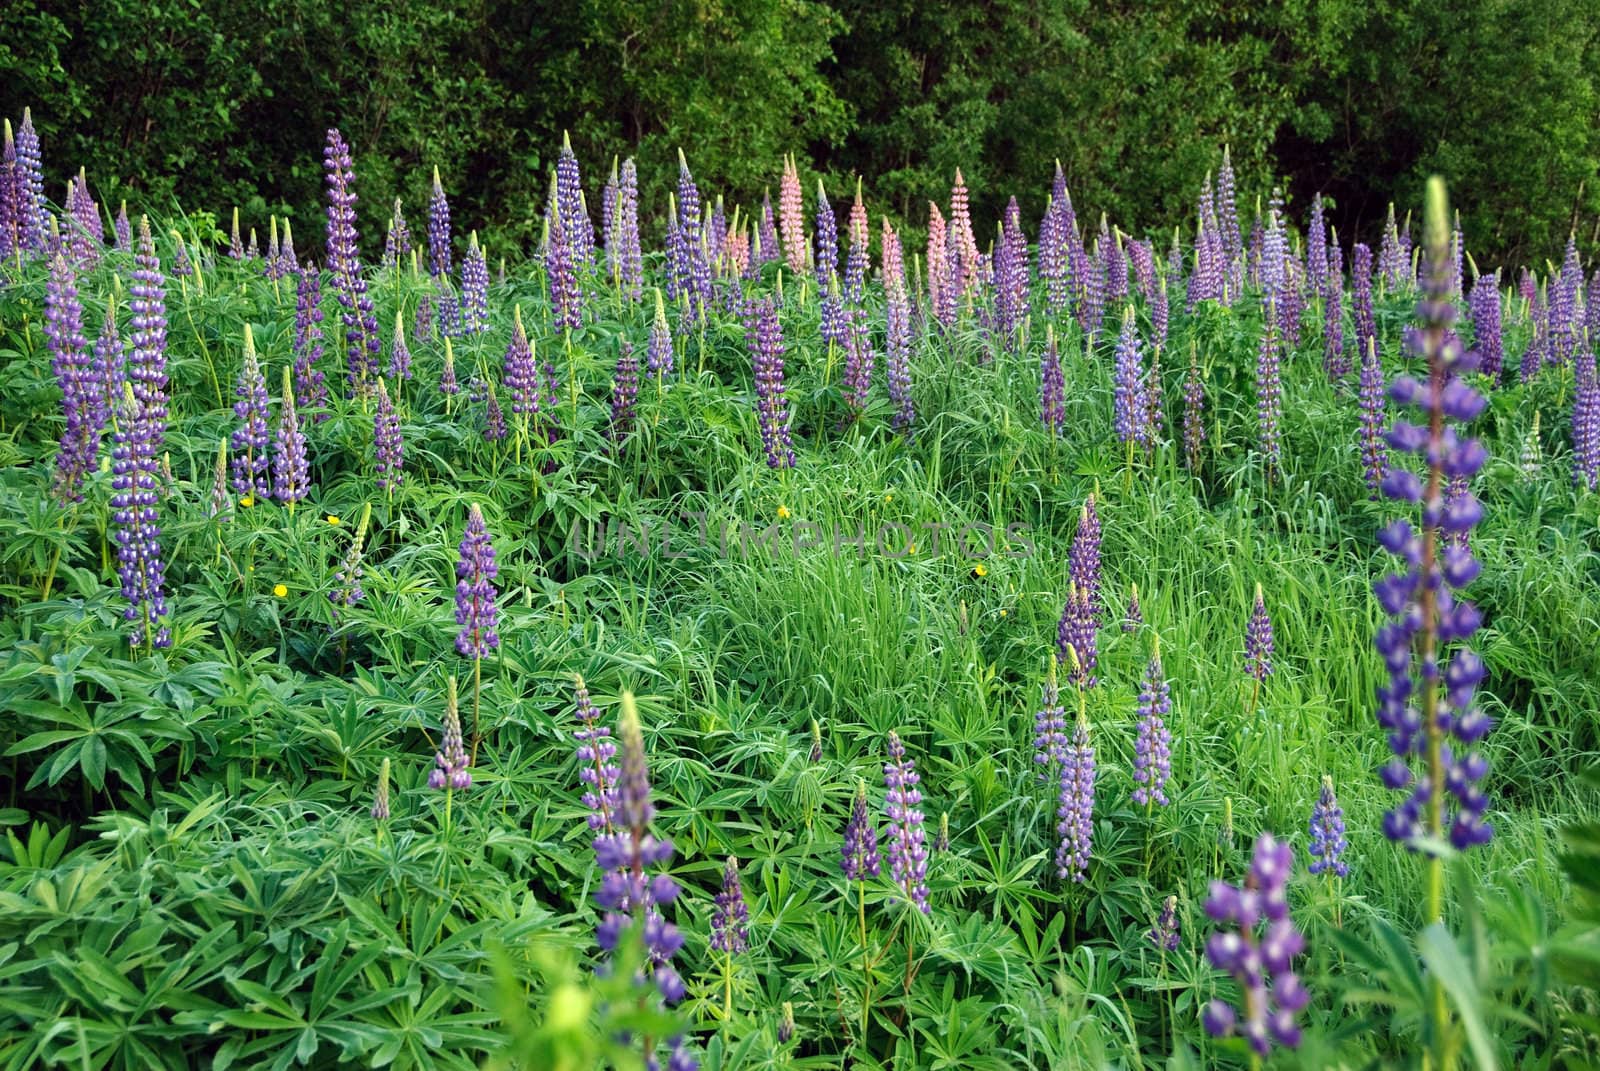 Field of wild lupines growing in a Northern forest